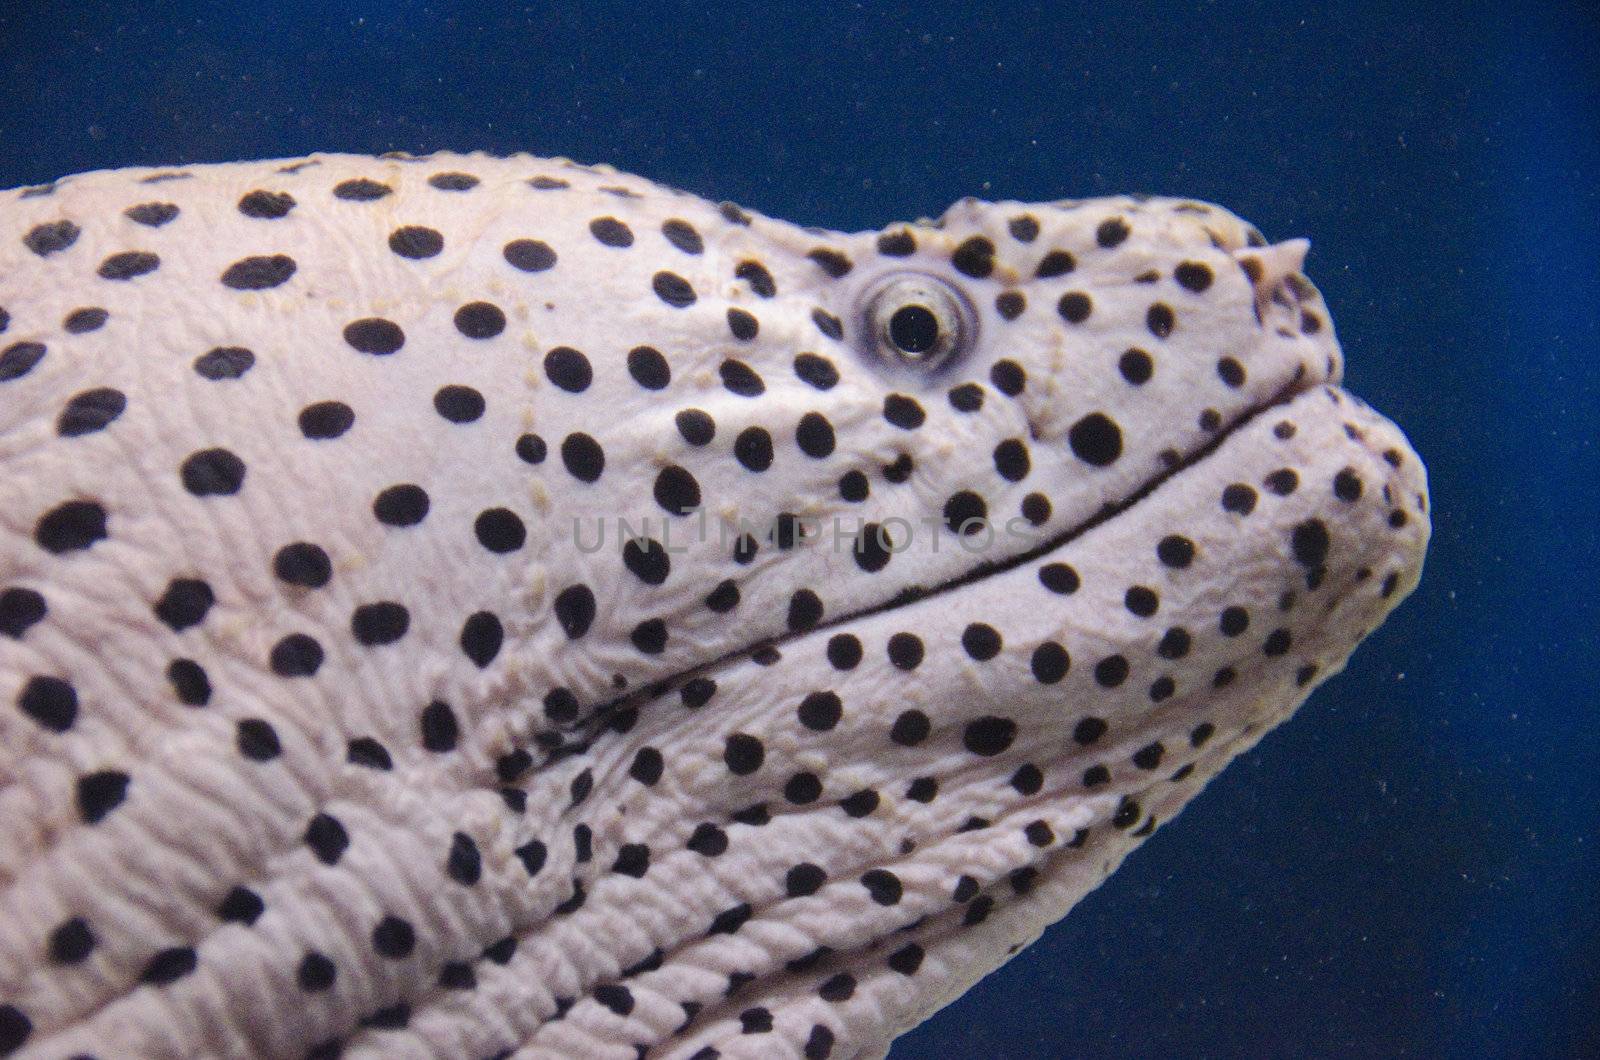 Head of a Moray eel in an aquarium in front of blue background